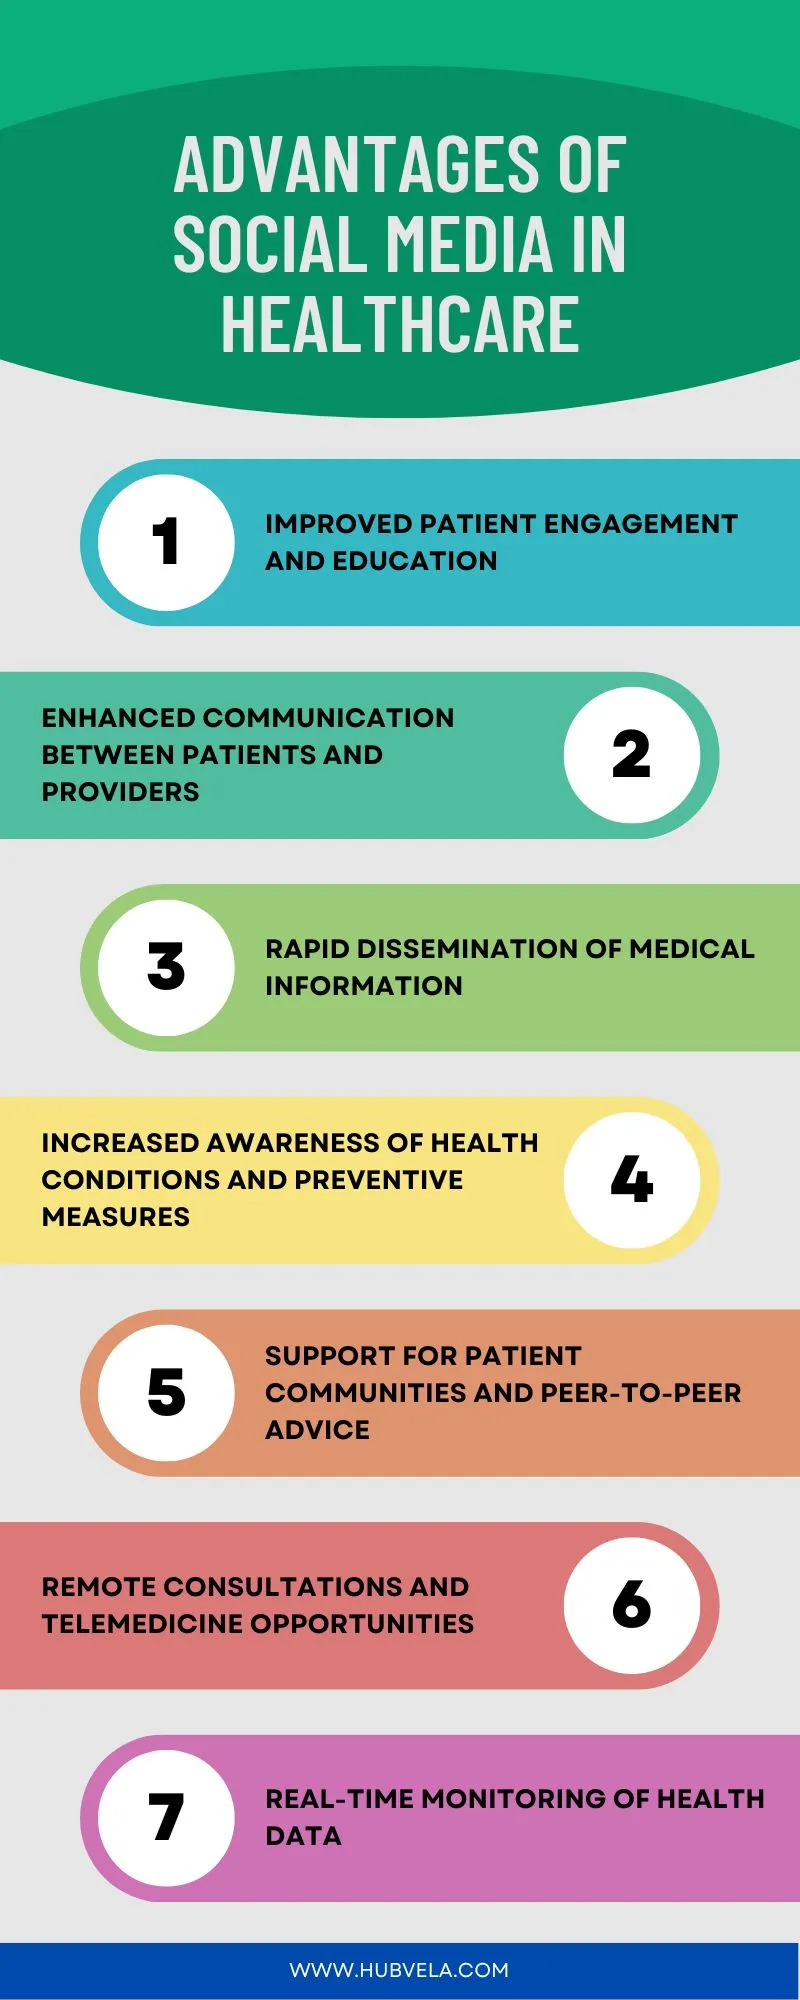 Advantages of Social Media in Healthcare infographic